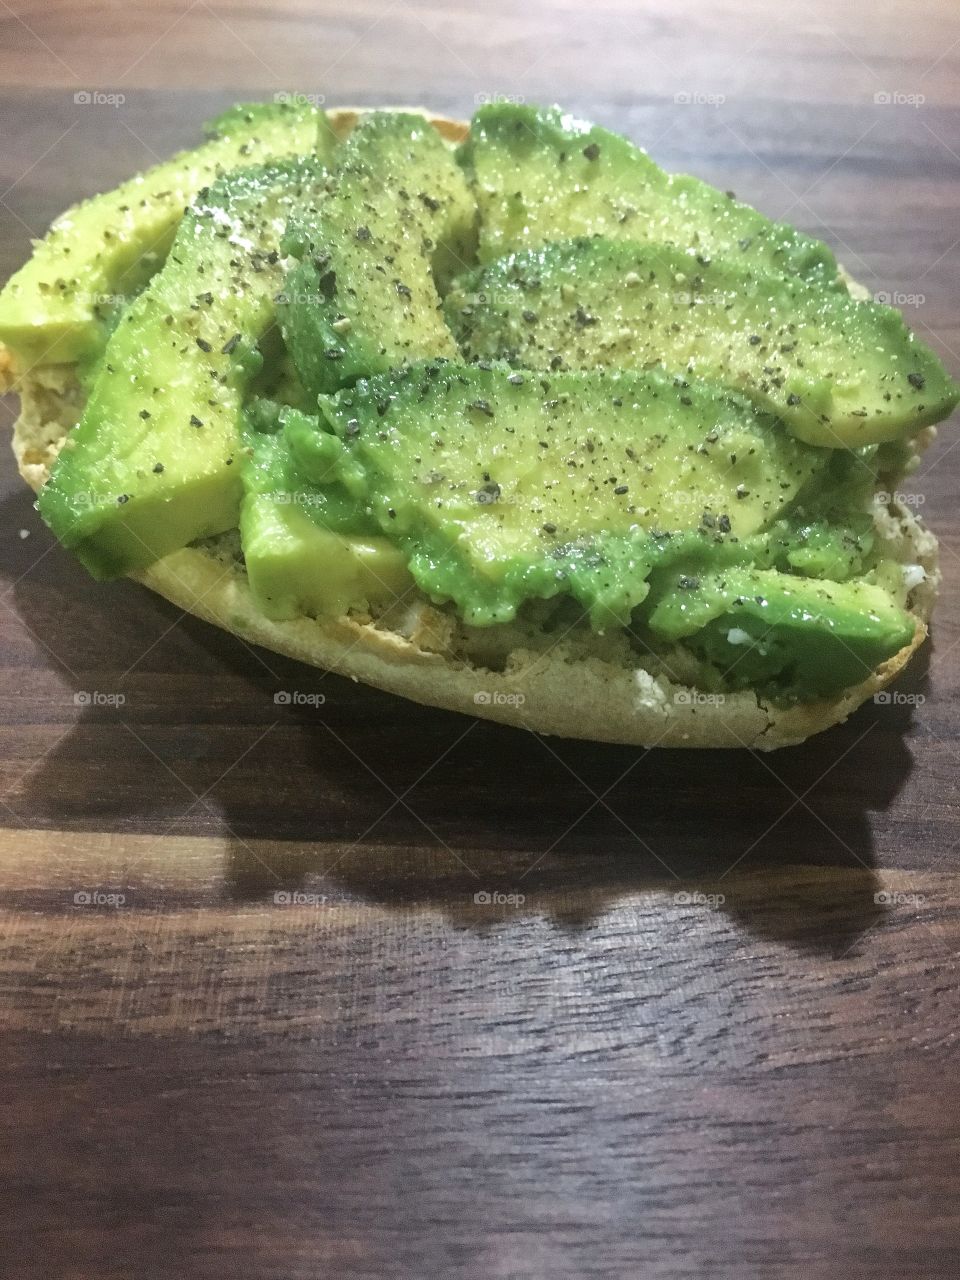 Avocado toast: sliced avocado on a toasted English muffin seasoned with salt and pepper atop a wooden plate.